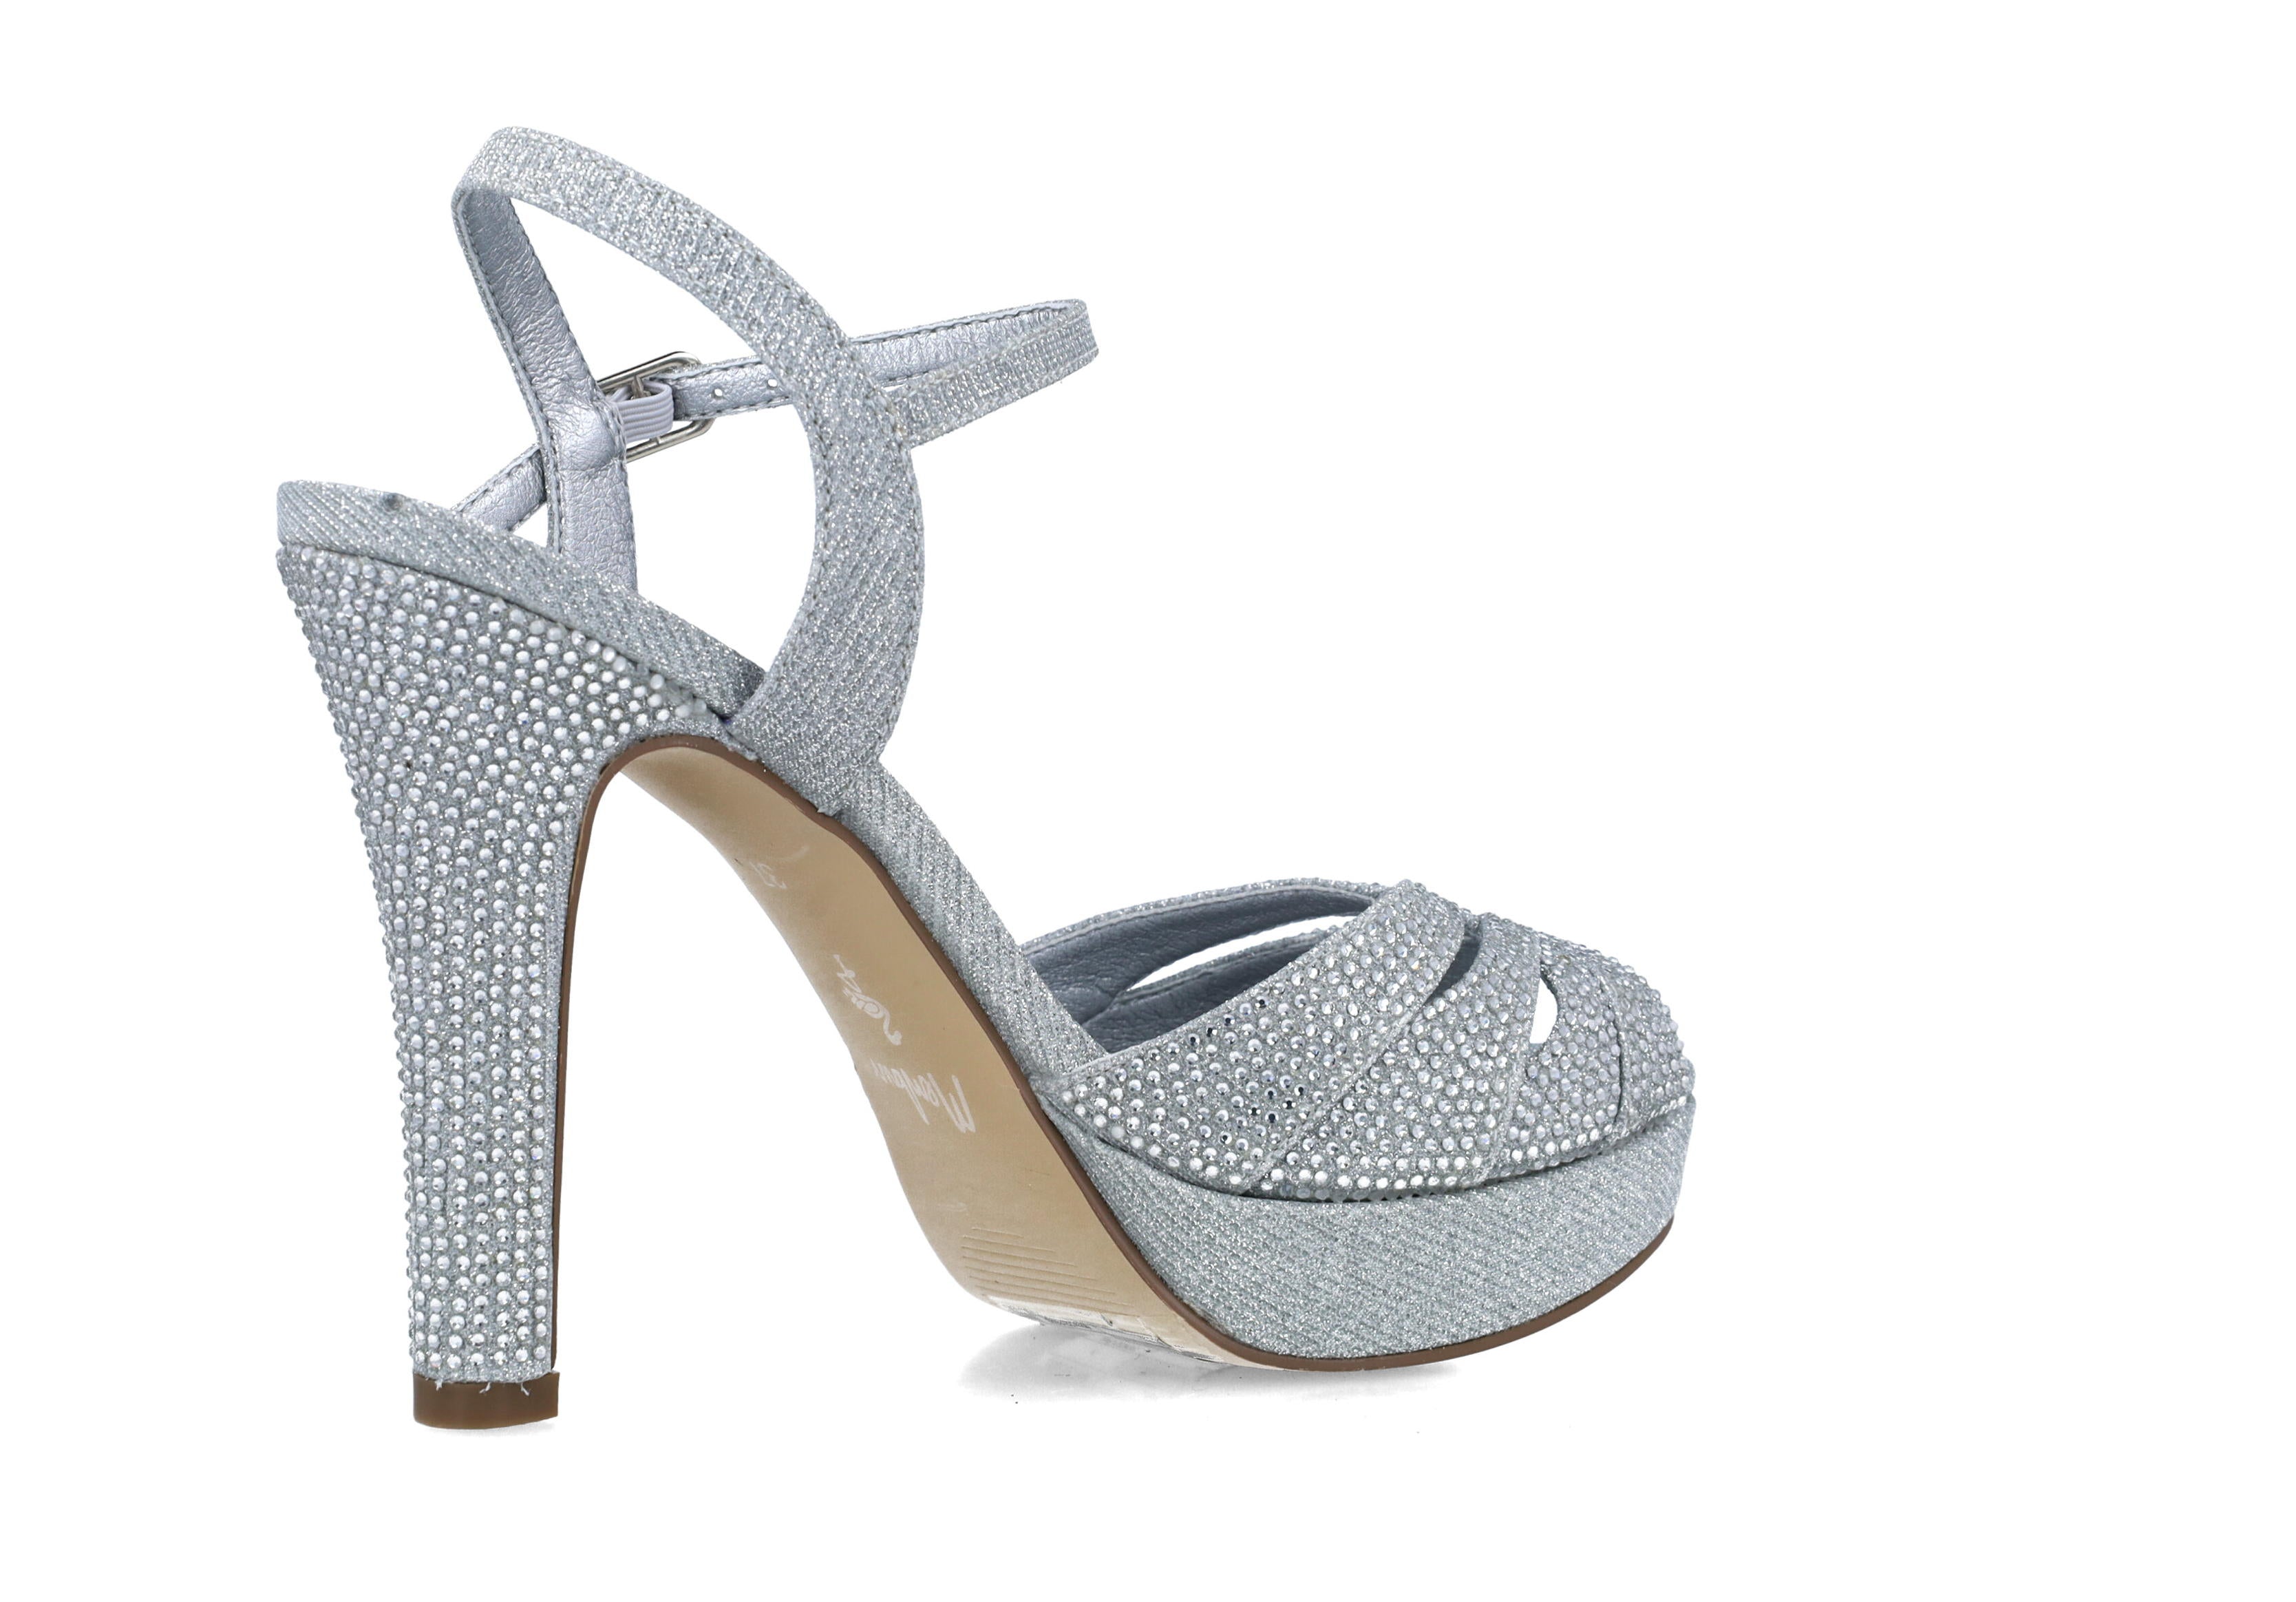 Silver High Heel Sandal With Ankle Strap_24832_09_03